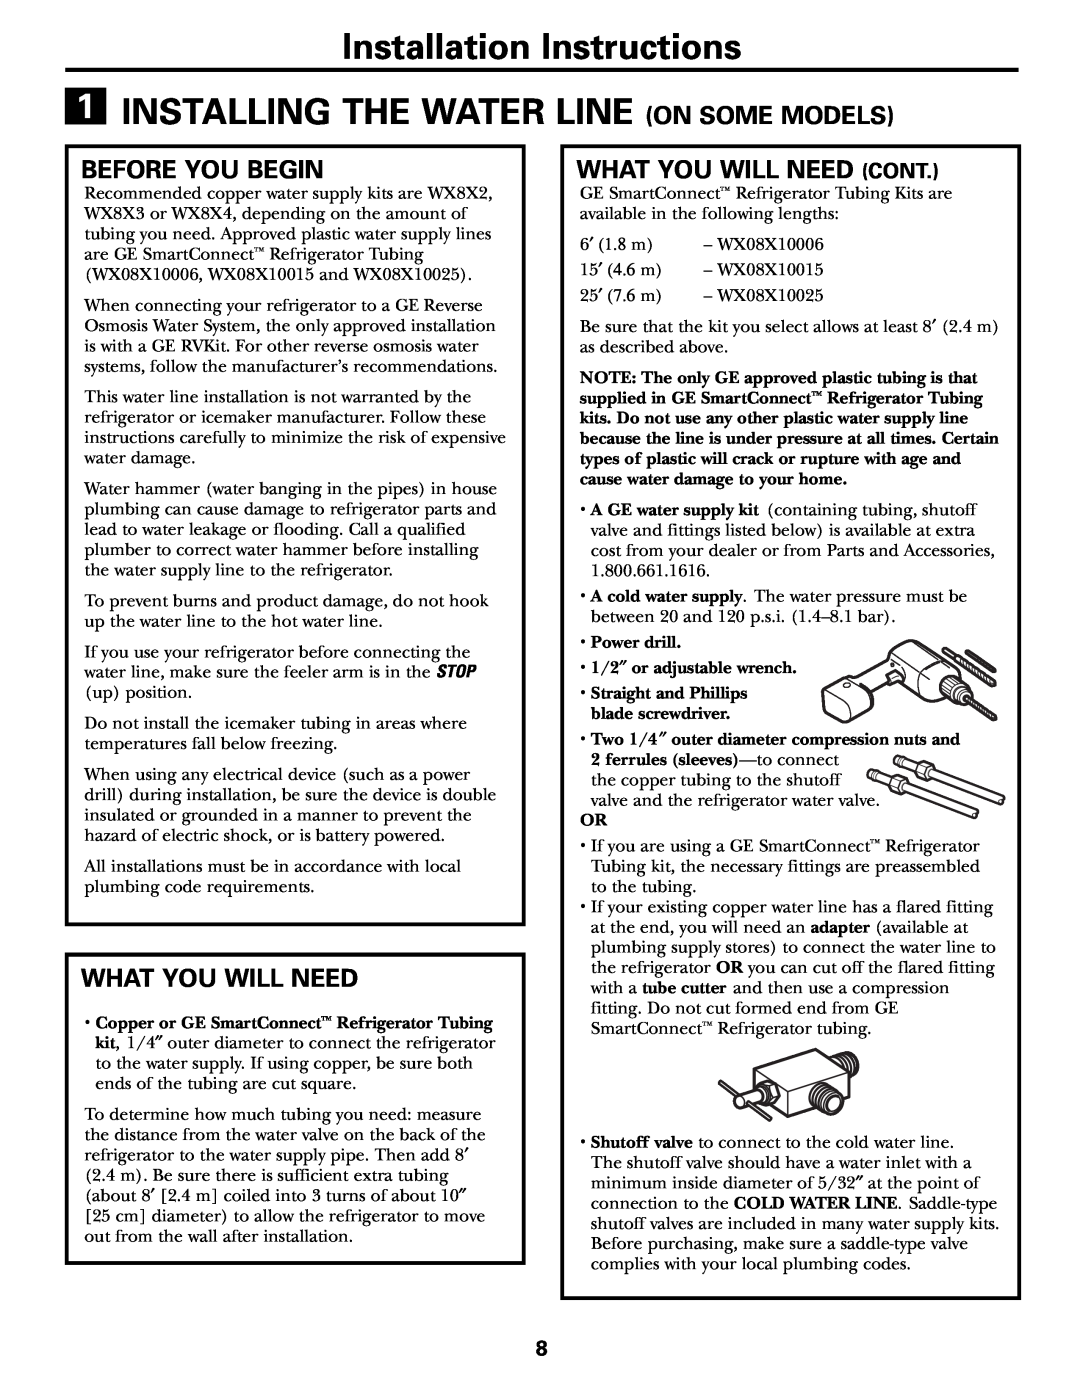 Americana Appliances 197D5984P004 Installation Instructions, Installing The Water Line On Some Models, Before You Begin 